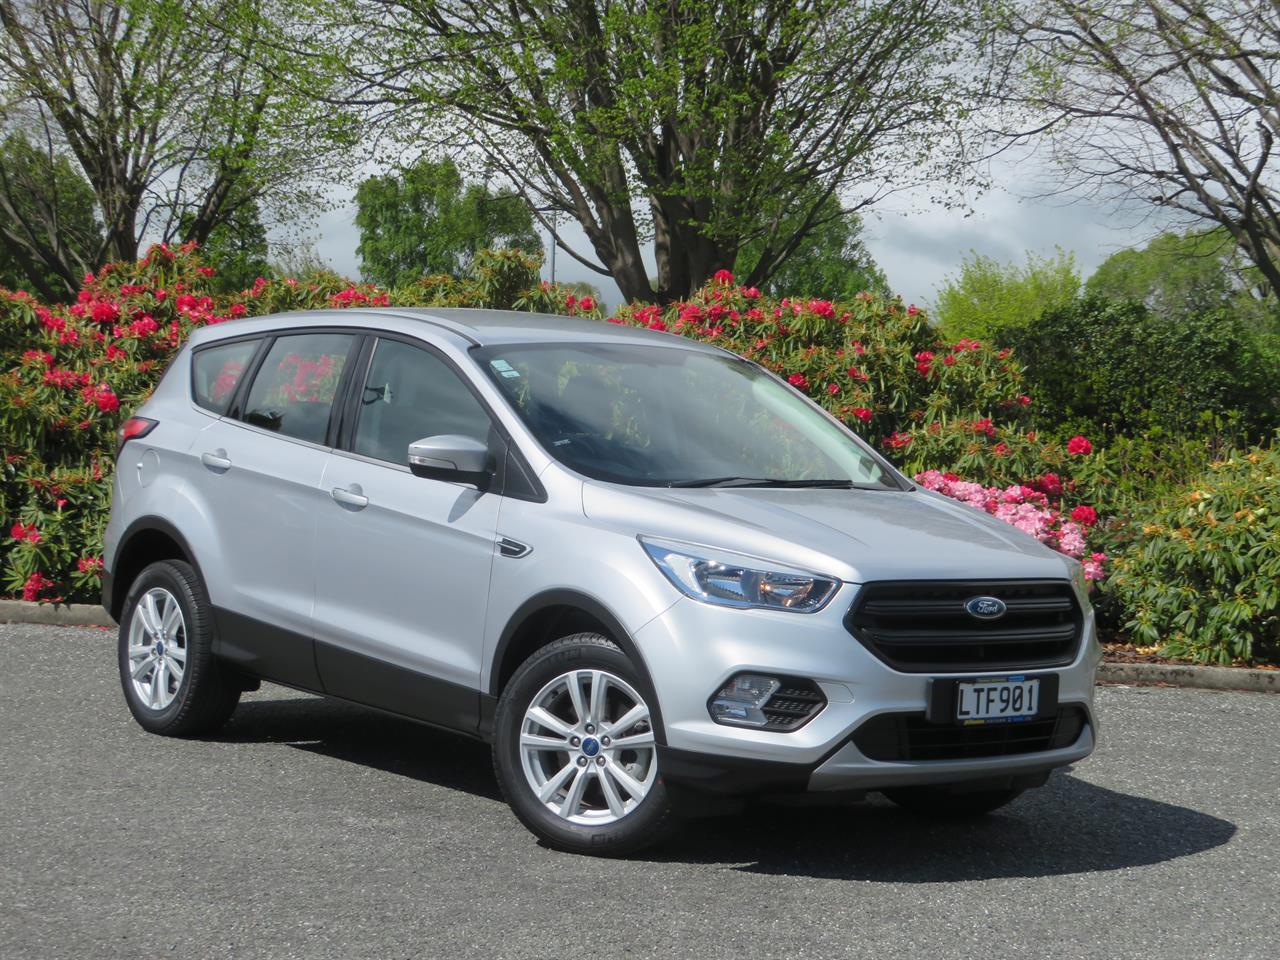 image-0, 2018 Ford Escape AMBIENTE - 4WD - LOW KM'S - NZ NE at Gore